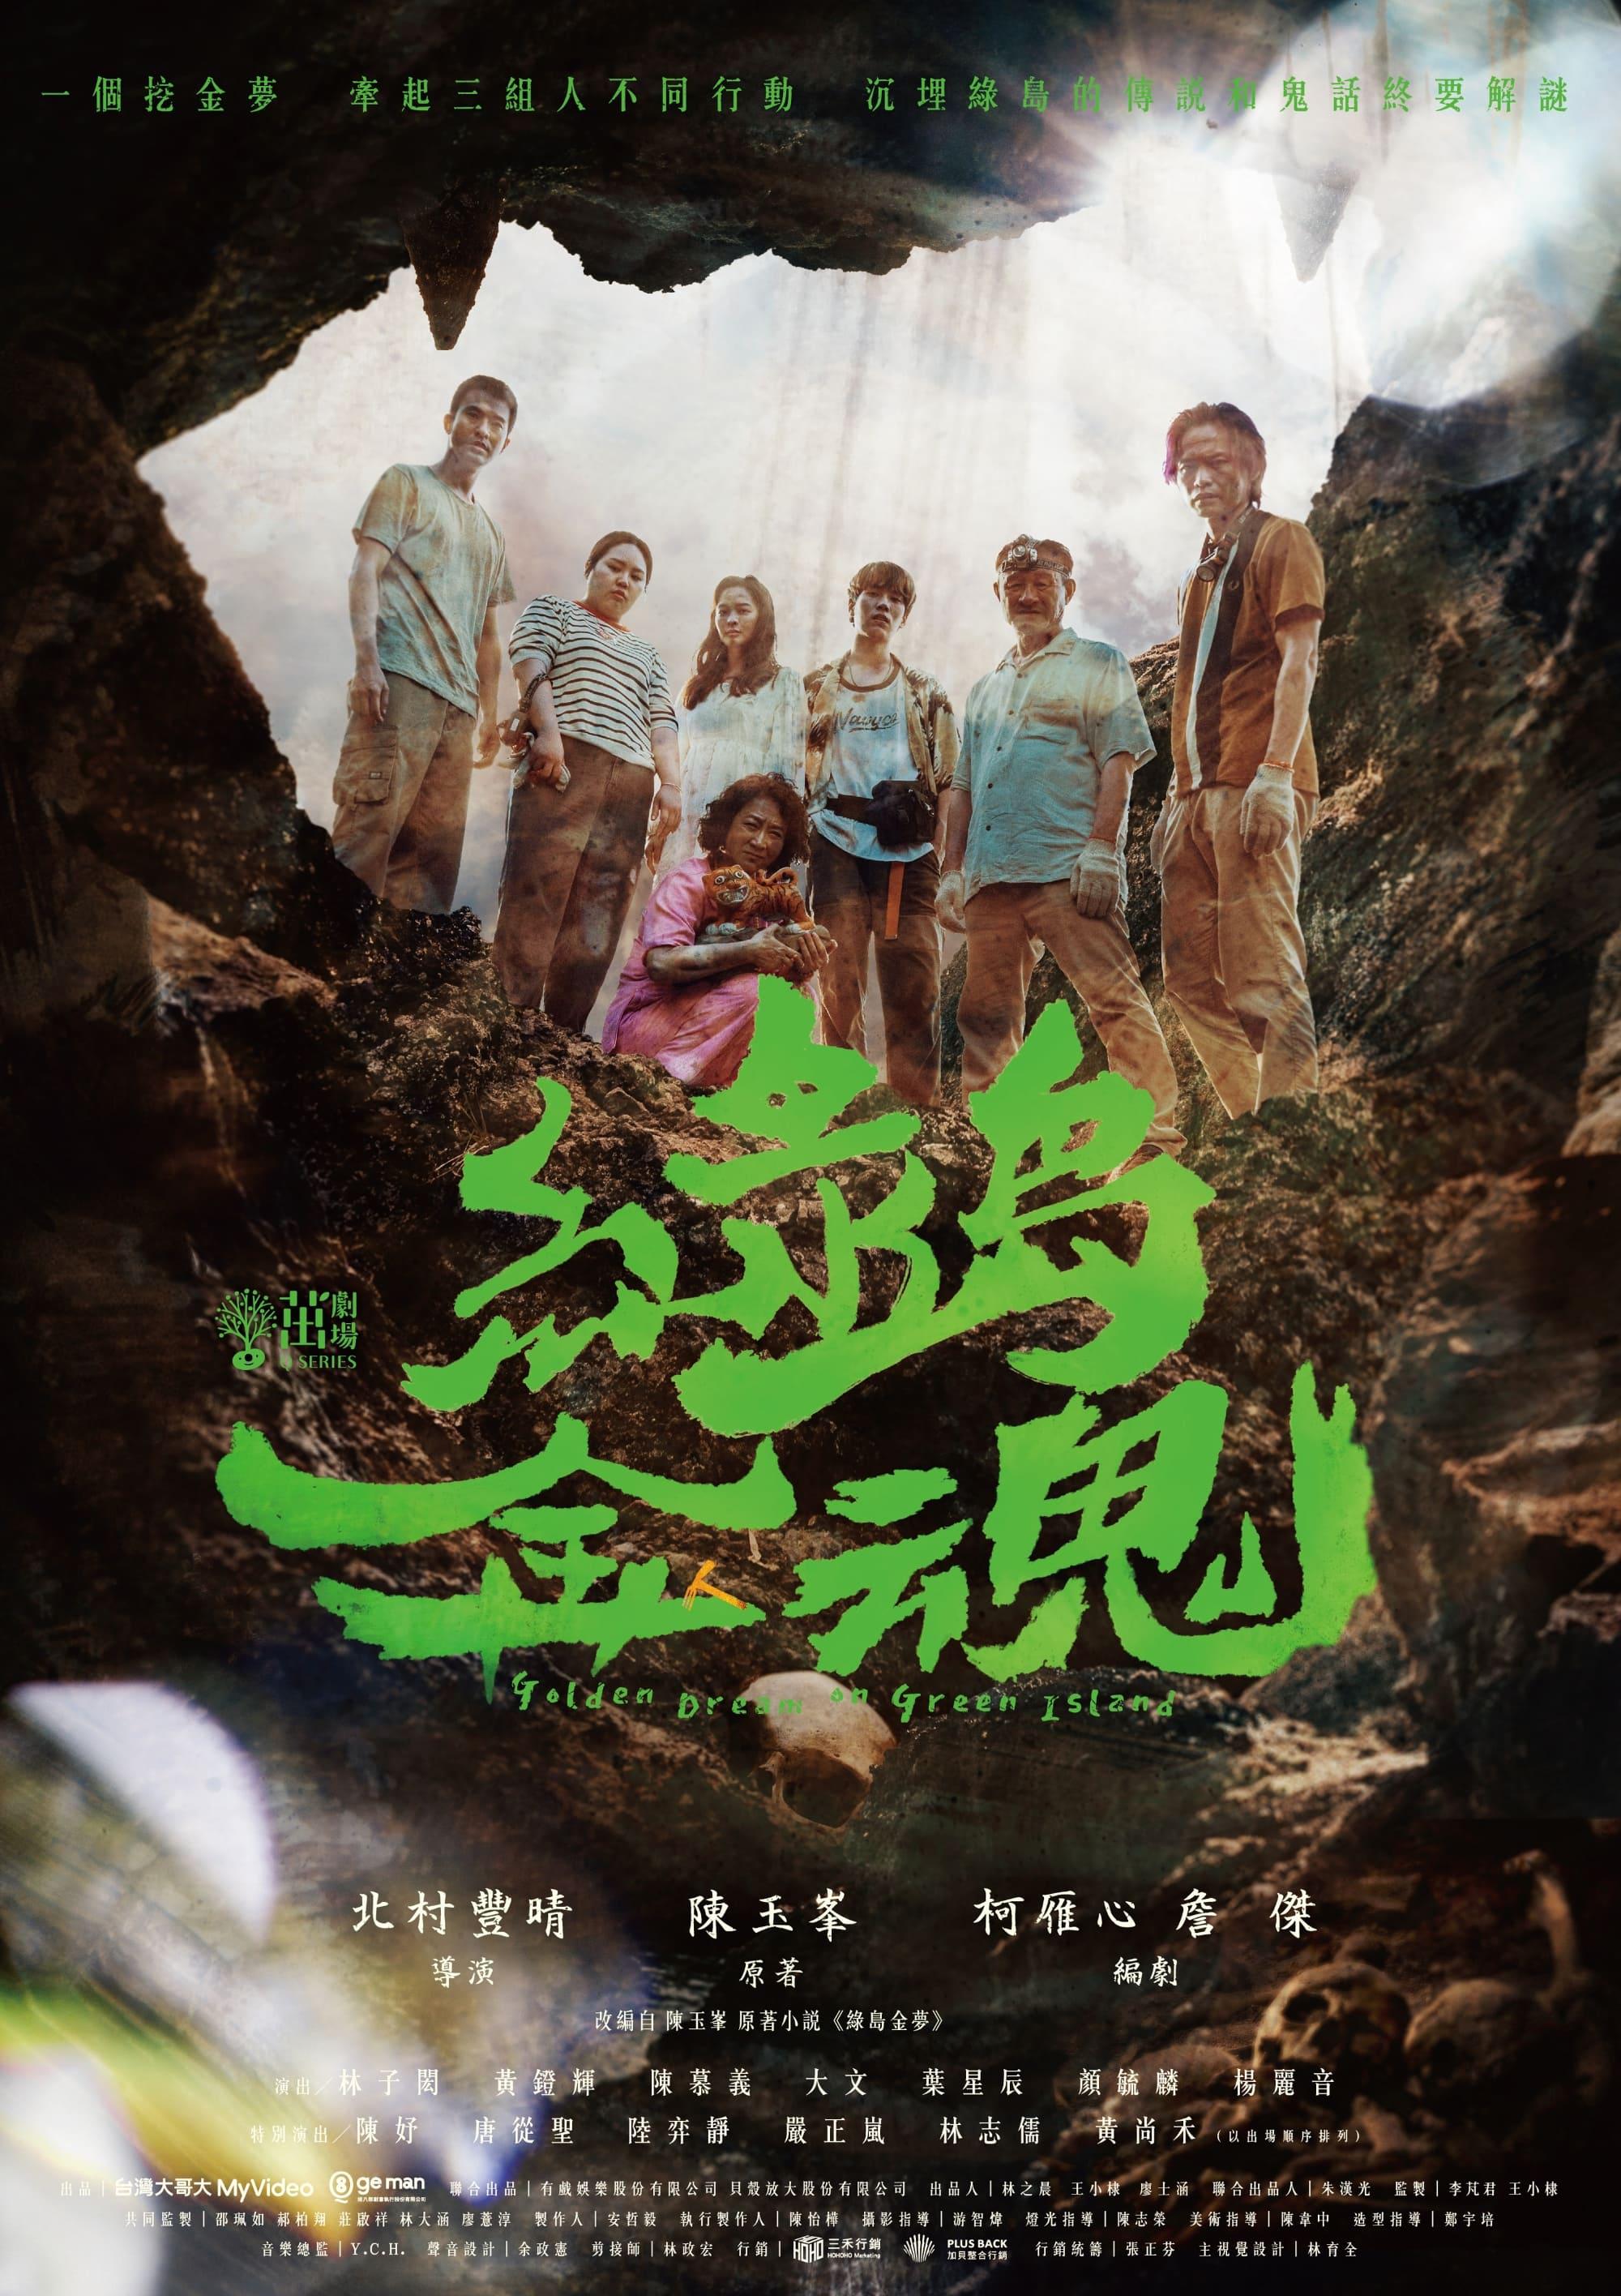 TV ratings for Golden Dream On Green Island (綠島金魂) in Thailand. PTS TV series